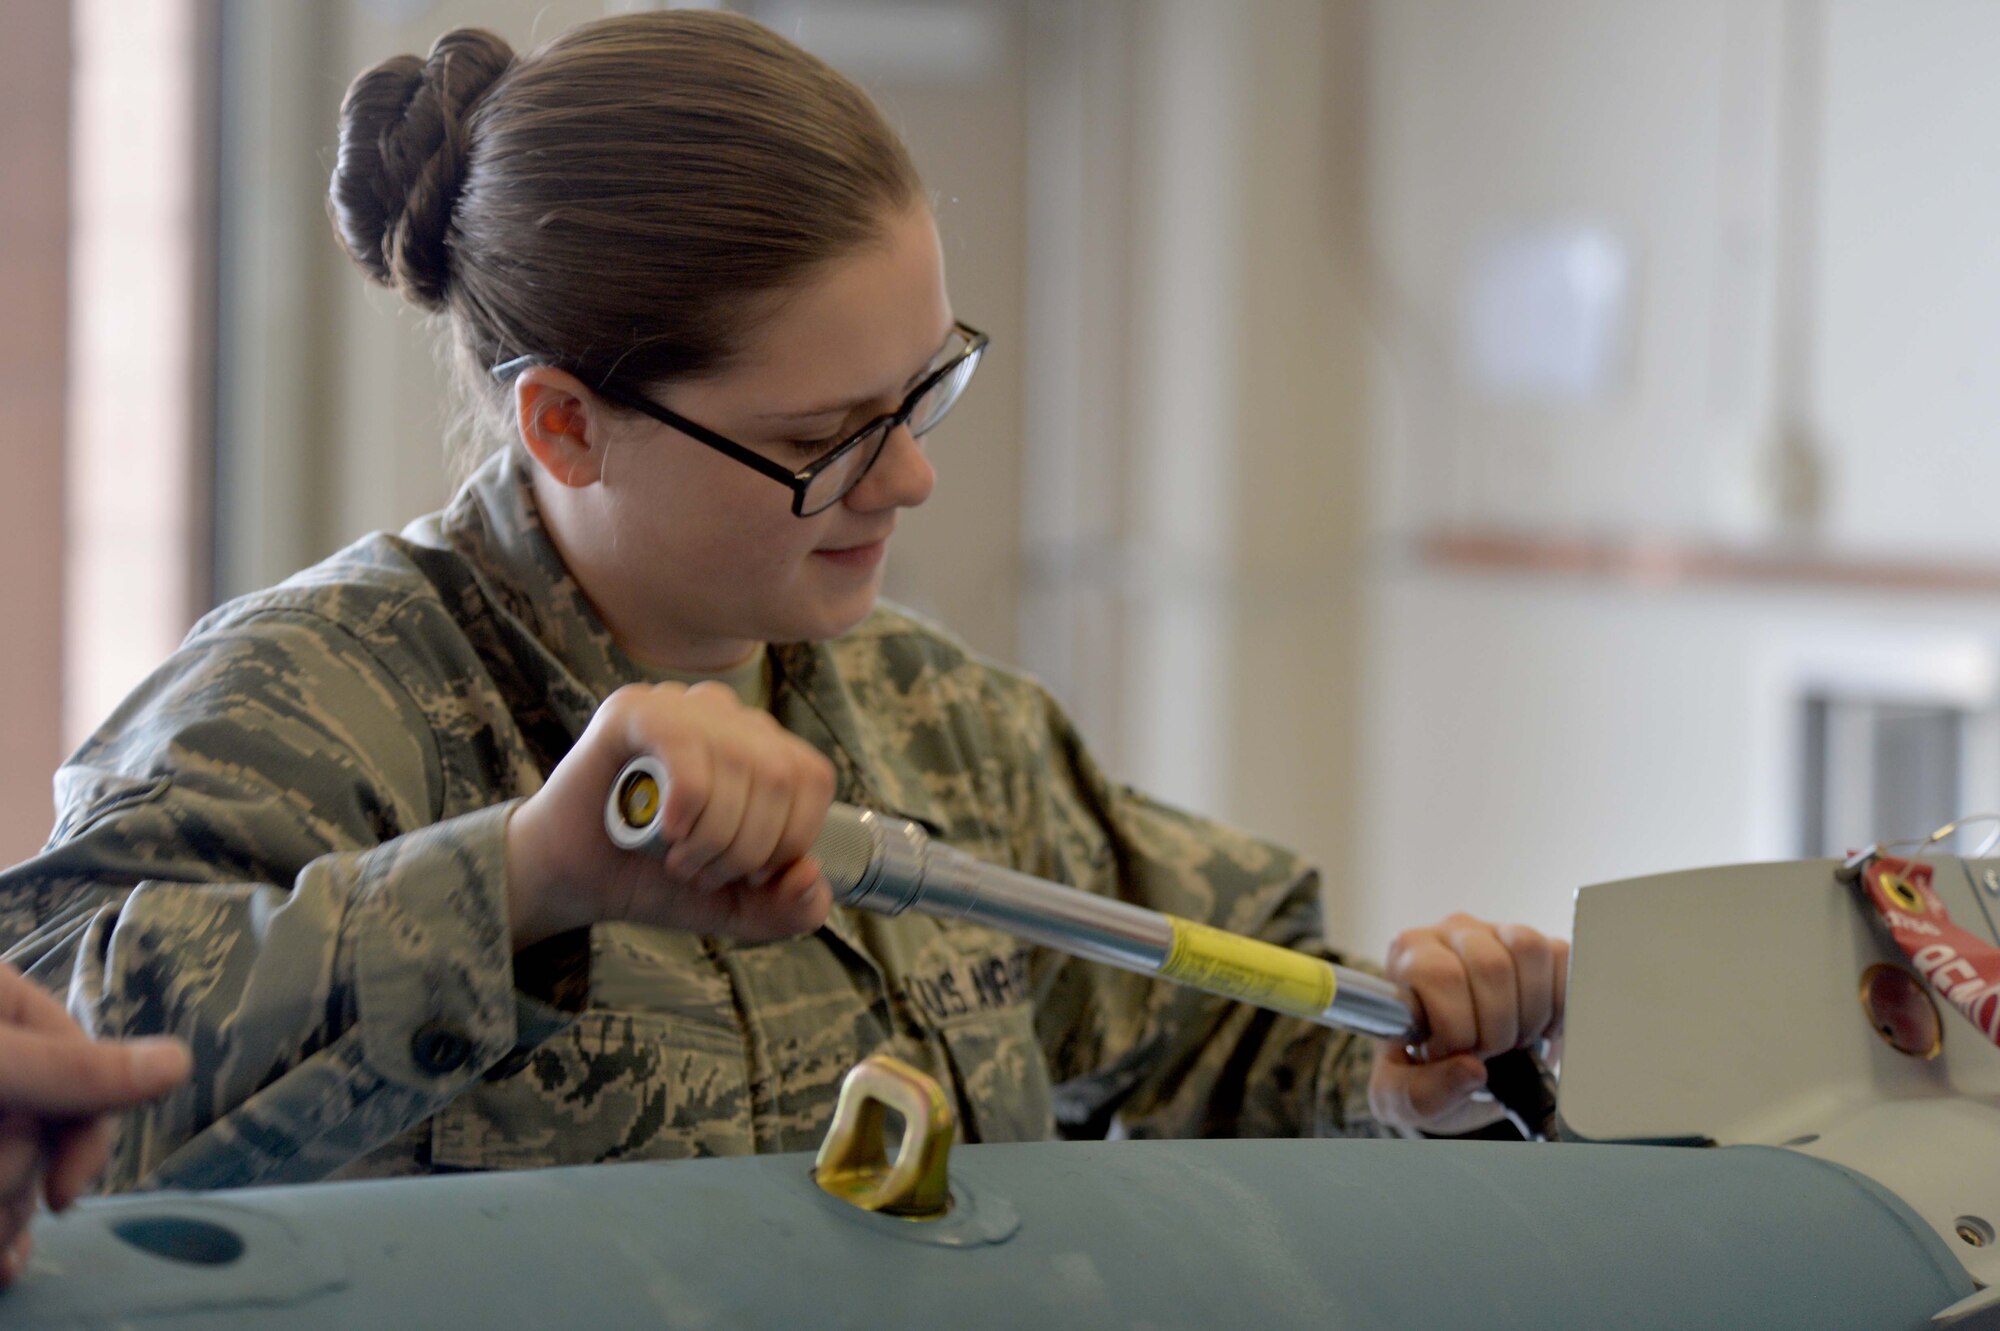 Airman Emily, 432nd Maintenance Squadron munitions flight crew member, performs maintenance on an inert GBU-12 Paveway ll laser-guided bomb April 27, 2016, at Creech Air Force Base, Nevada. Emily has recently finished her career development courses and will soon deploy in support of MQ-1 and MQ-9 missions downrange. (U.S. Air Force photo by Airman 1st Class Kristan Campbell/Released).